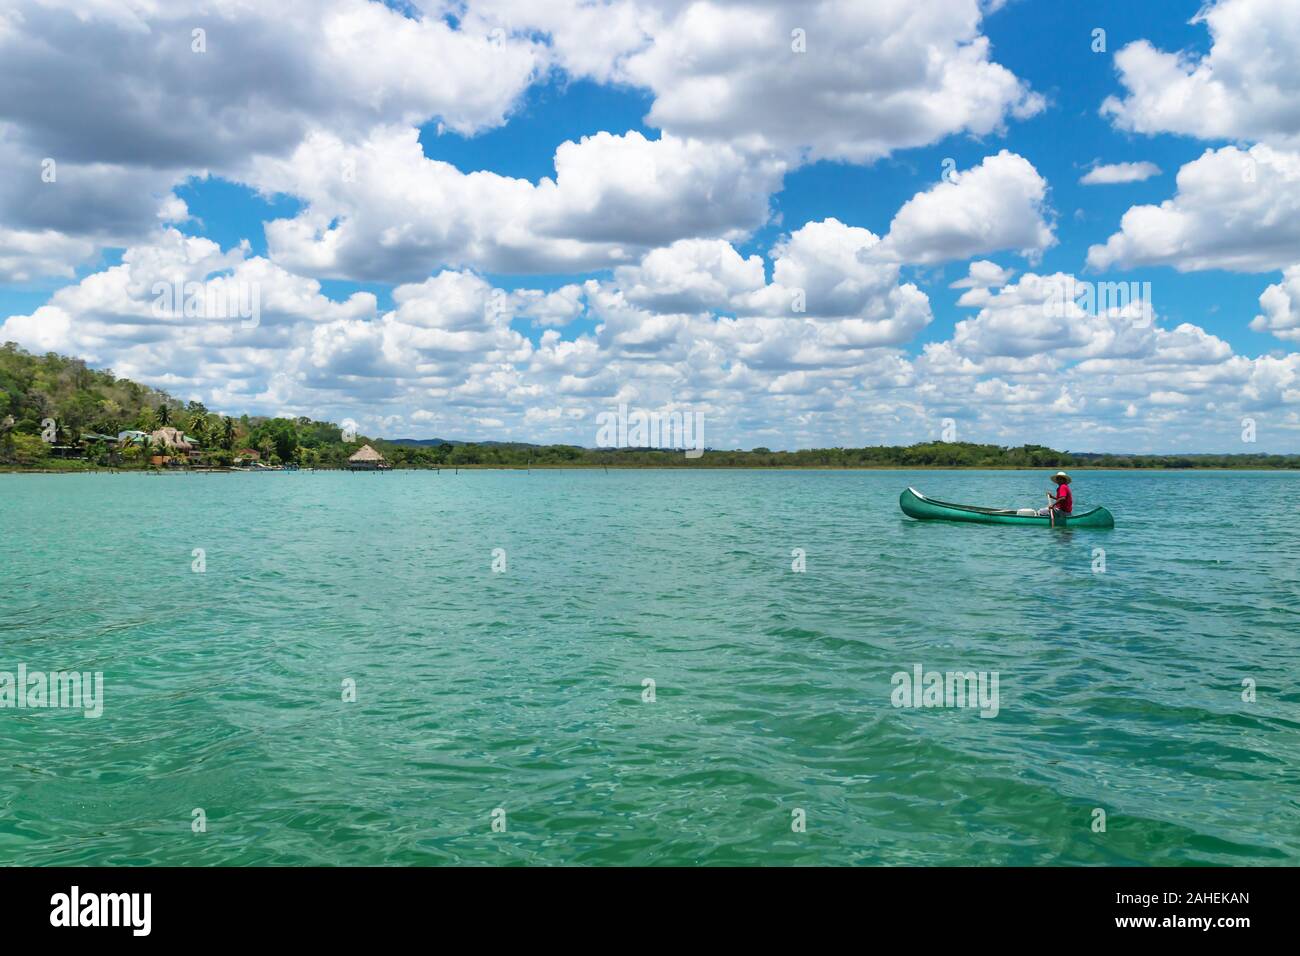 El Remate, Peten, Guatemala - 29 May 2019: Fisherman in canoe boat in turquoise colored lake Itza along village with sunny cloud sky Stock Photo